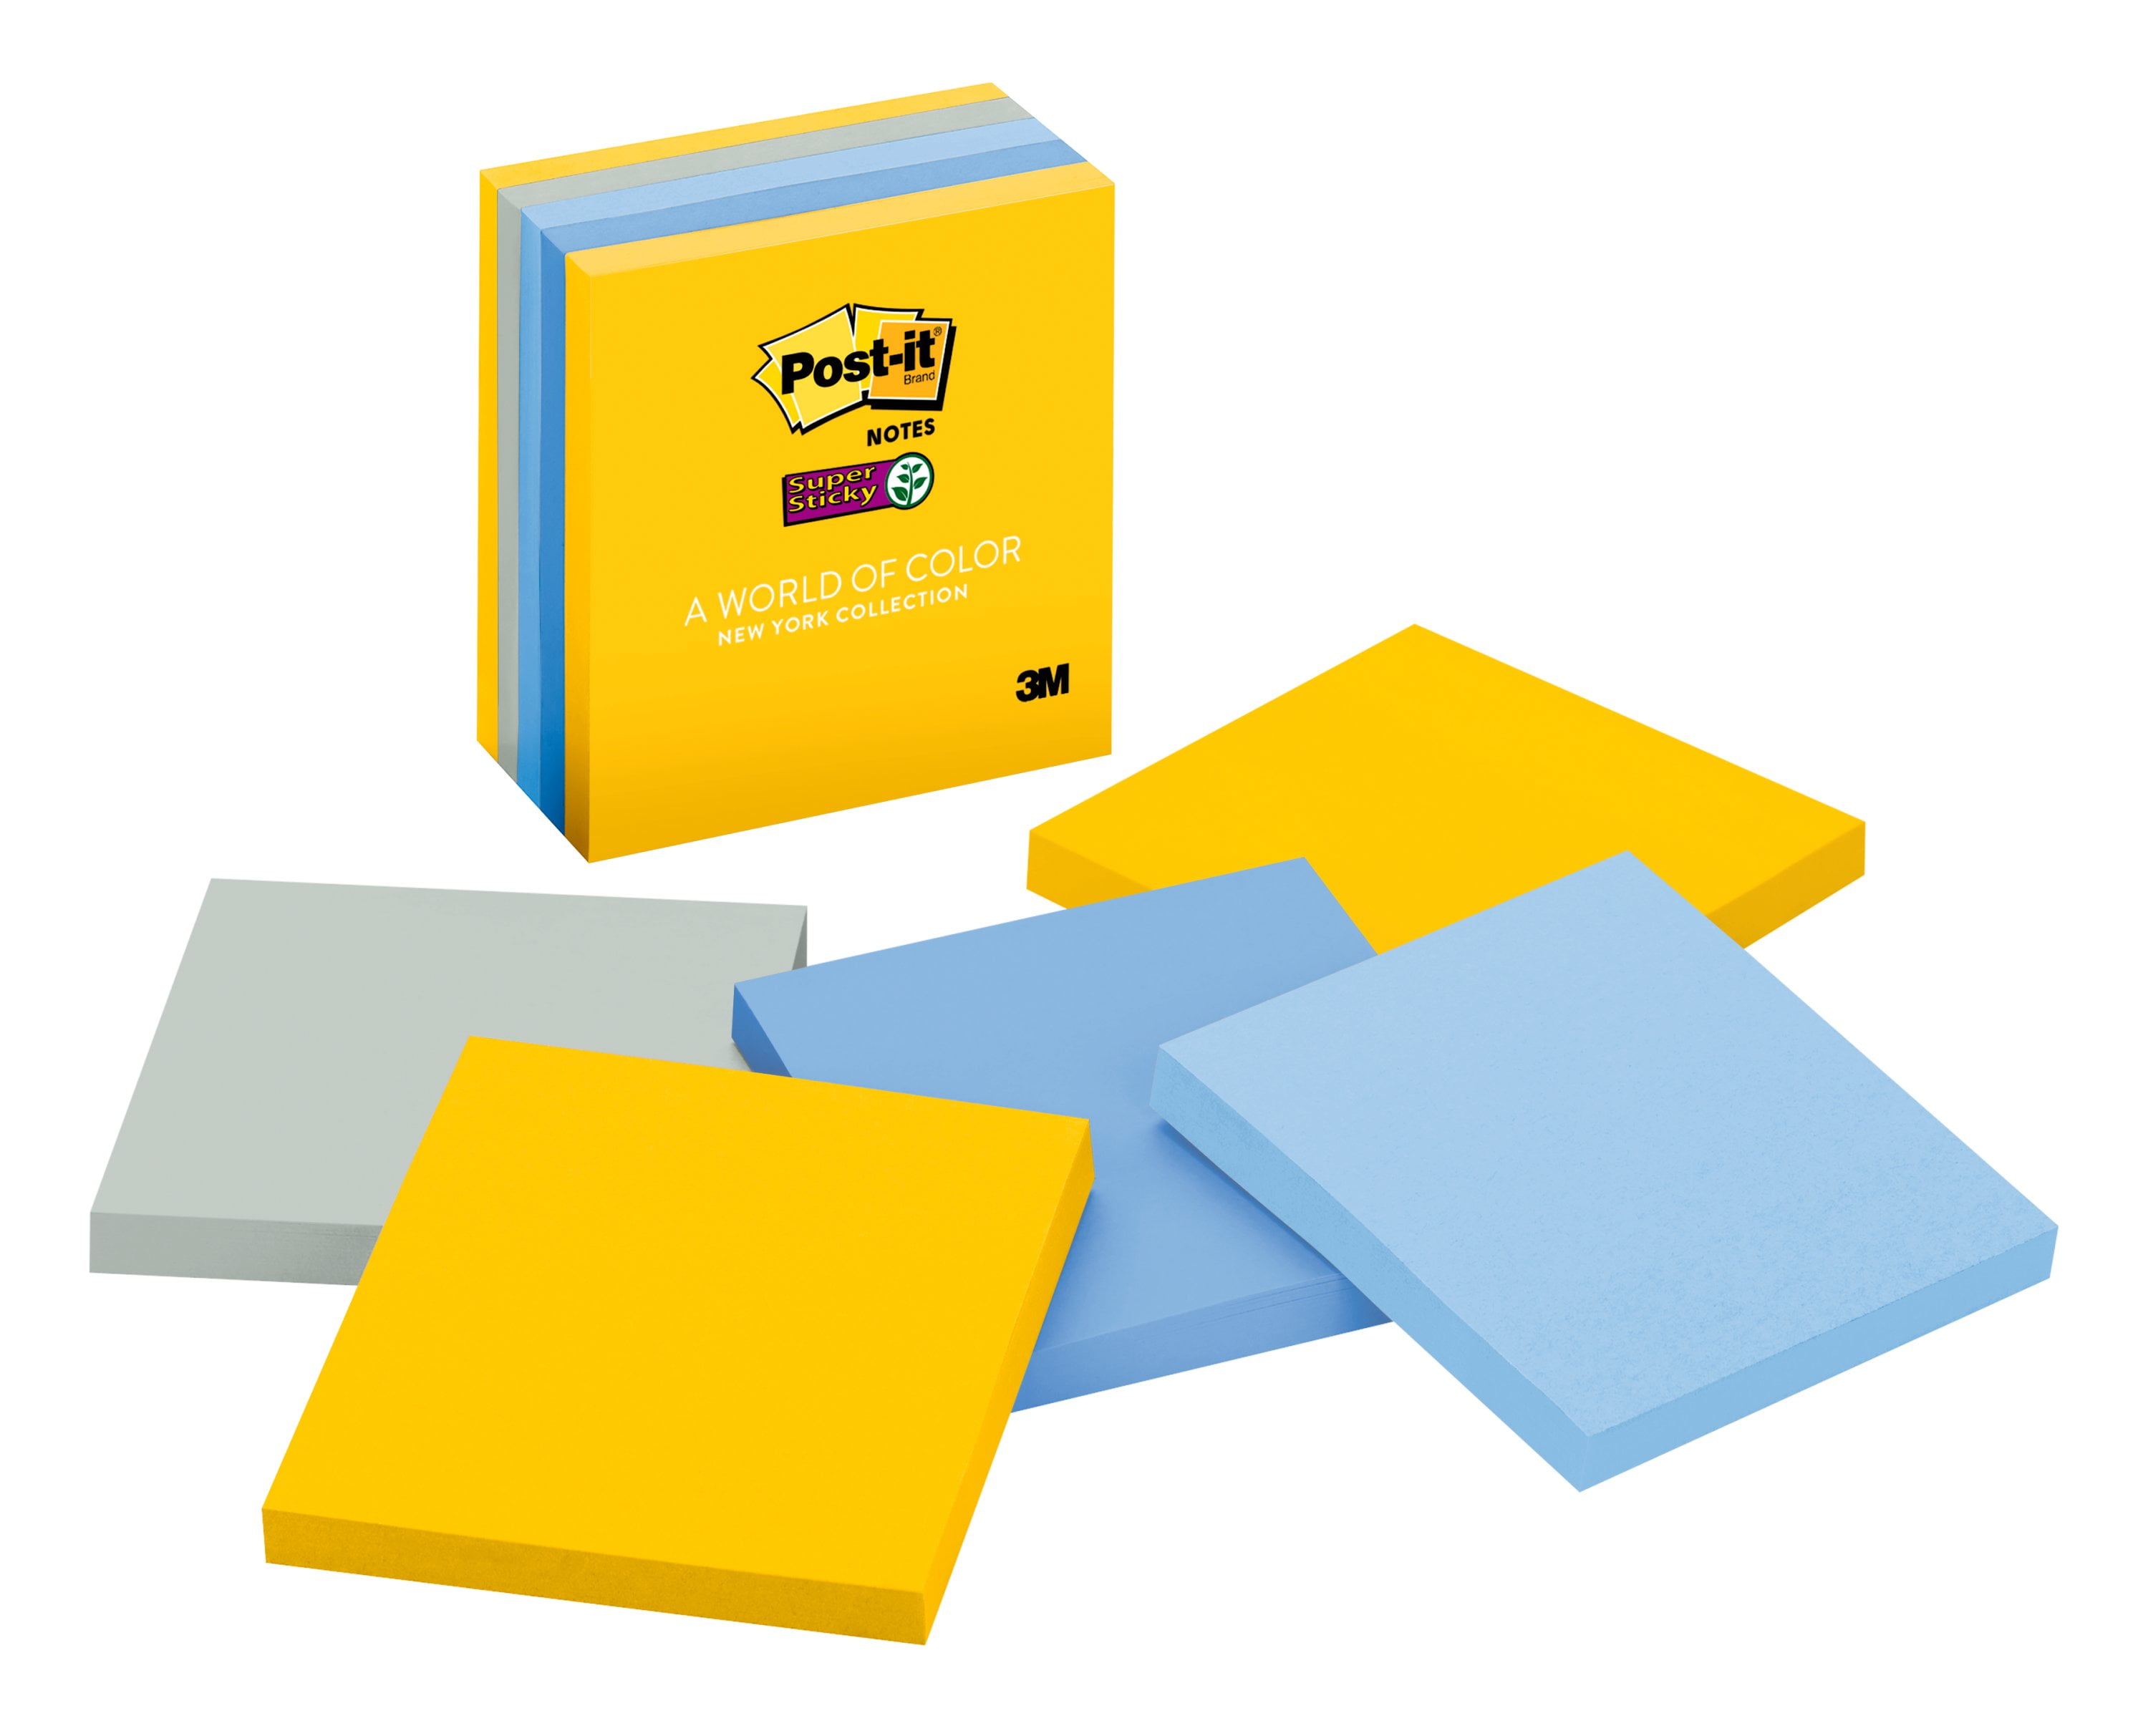 Post-It Solid Color Self-Stick Tab, 1 x 1.5, Assorted - 4 packs, 22 count each